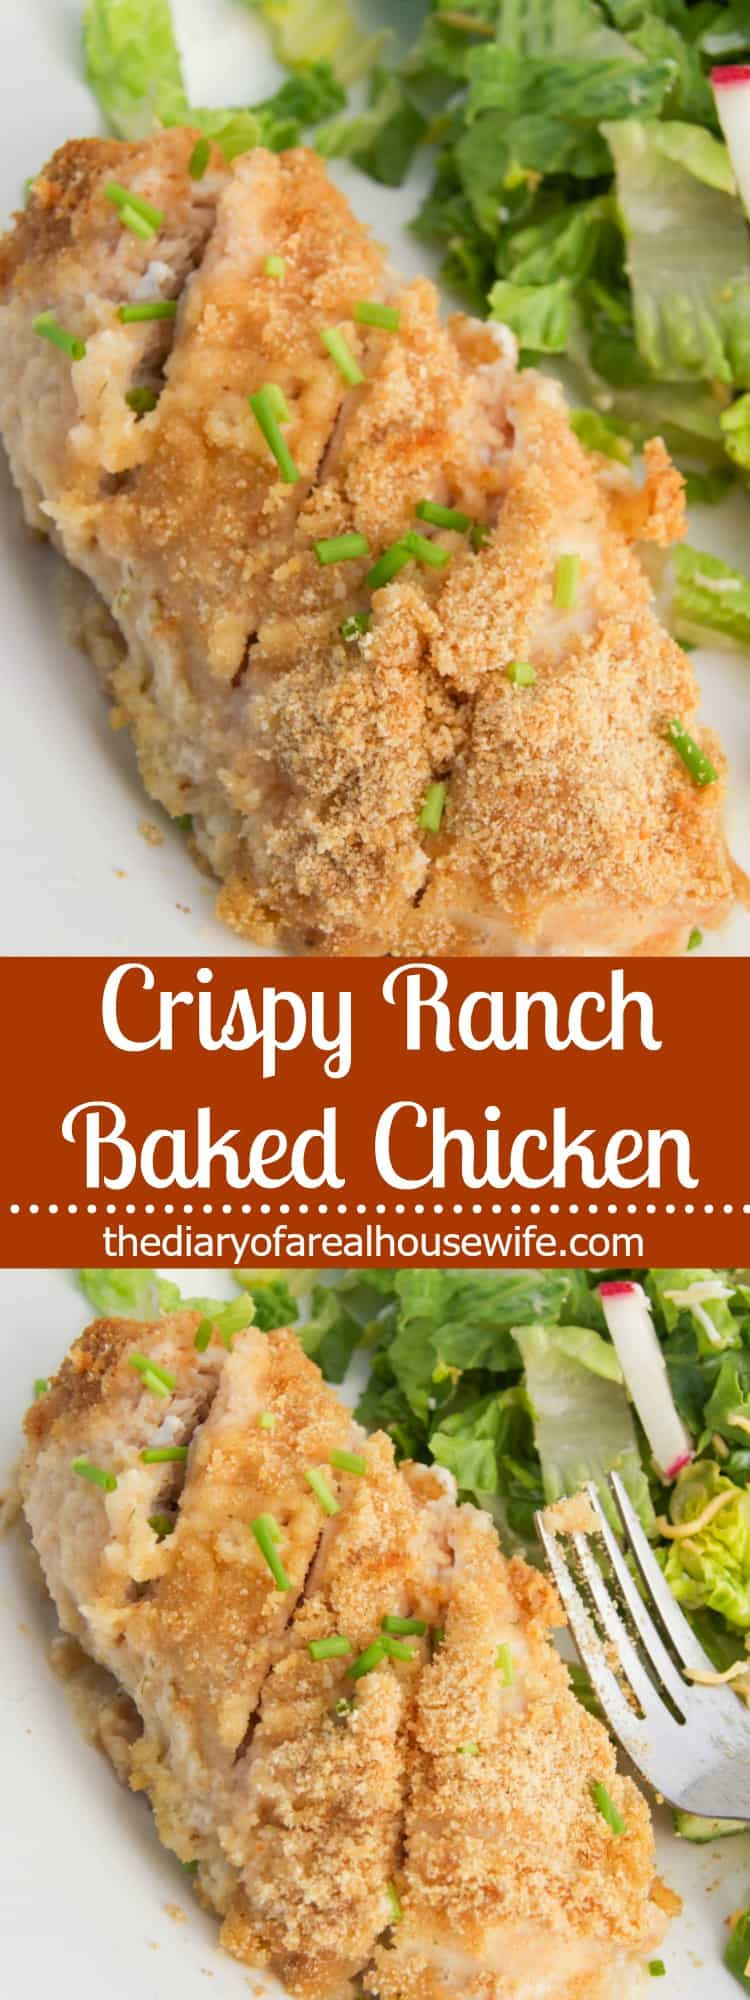 Ranch Baked Chicken
 Crispy Ranch Baked Chicken The Diary of a Real Housewife